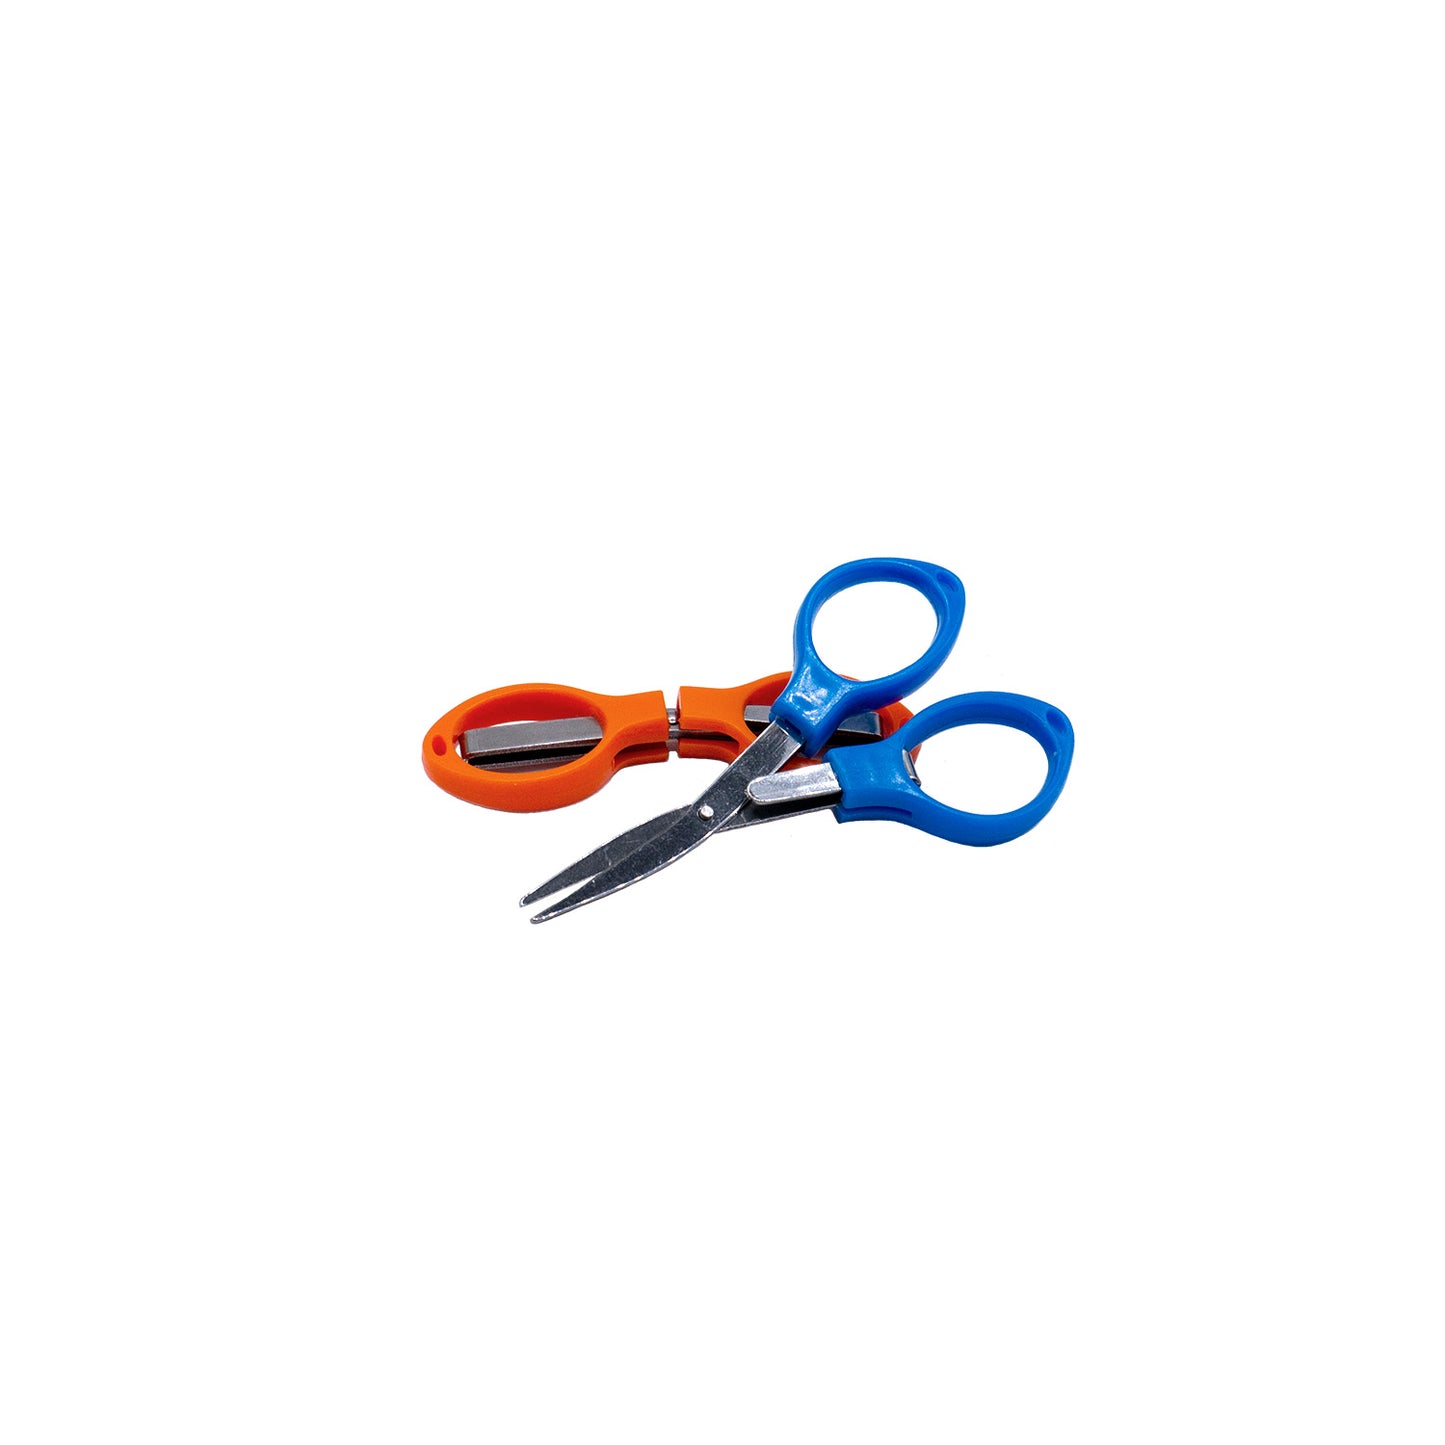 Blue scissors in closed cutting position resting in front of fully folded orange scissors.